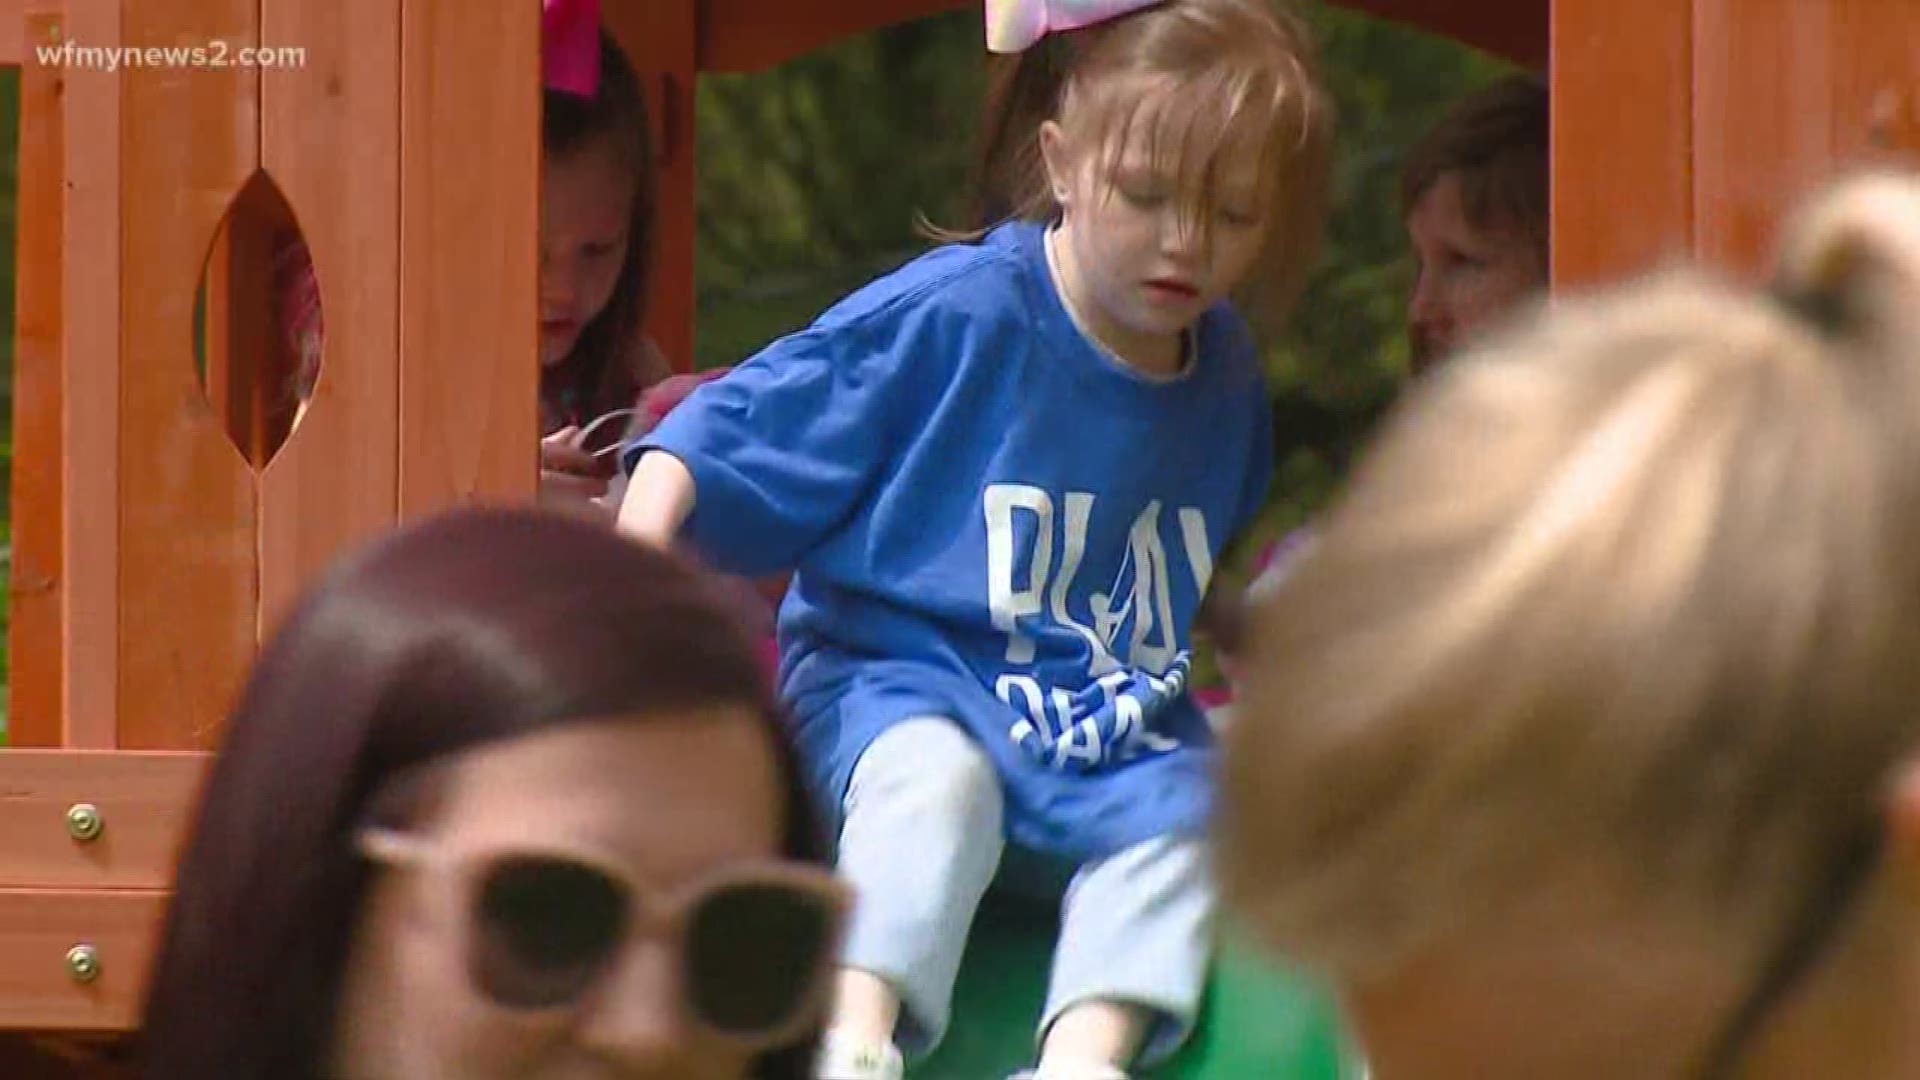 Gracie Belanger of Winston-Salem has a type of brain cancer that's forced her to stay home from school.
Today, she was surprised with a new playset in her backyard.